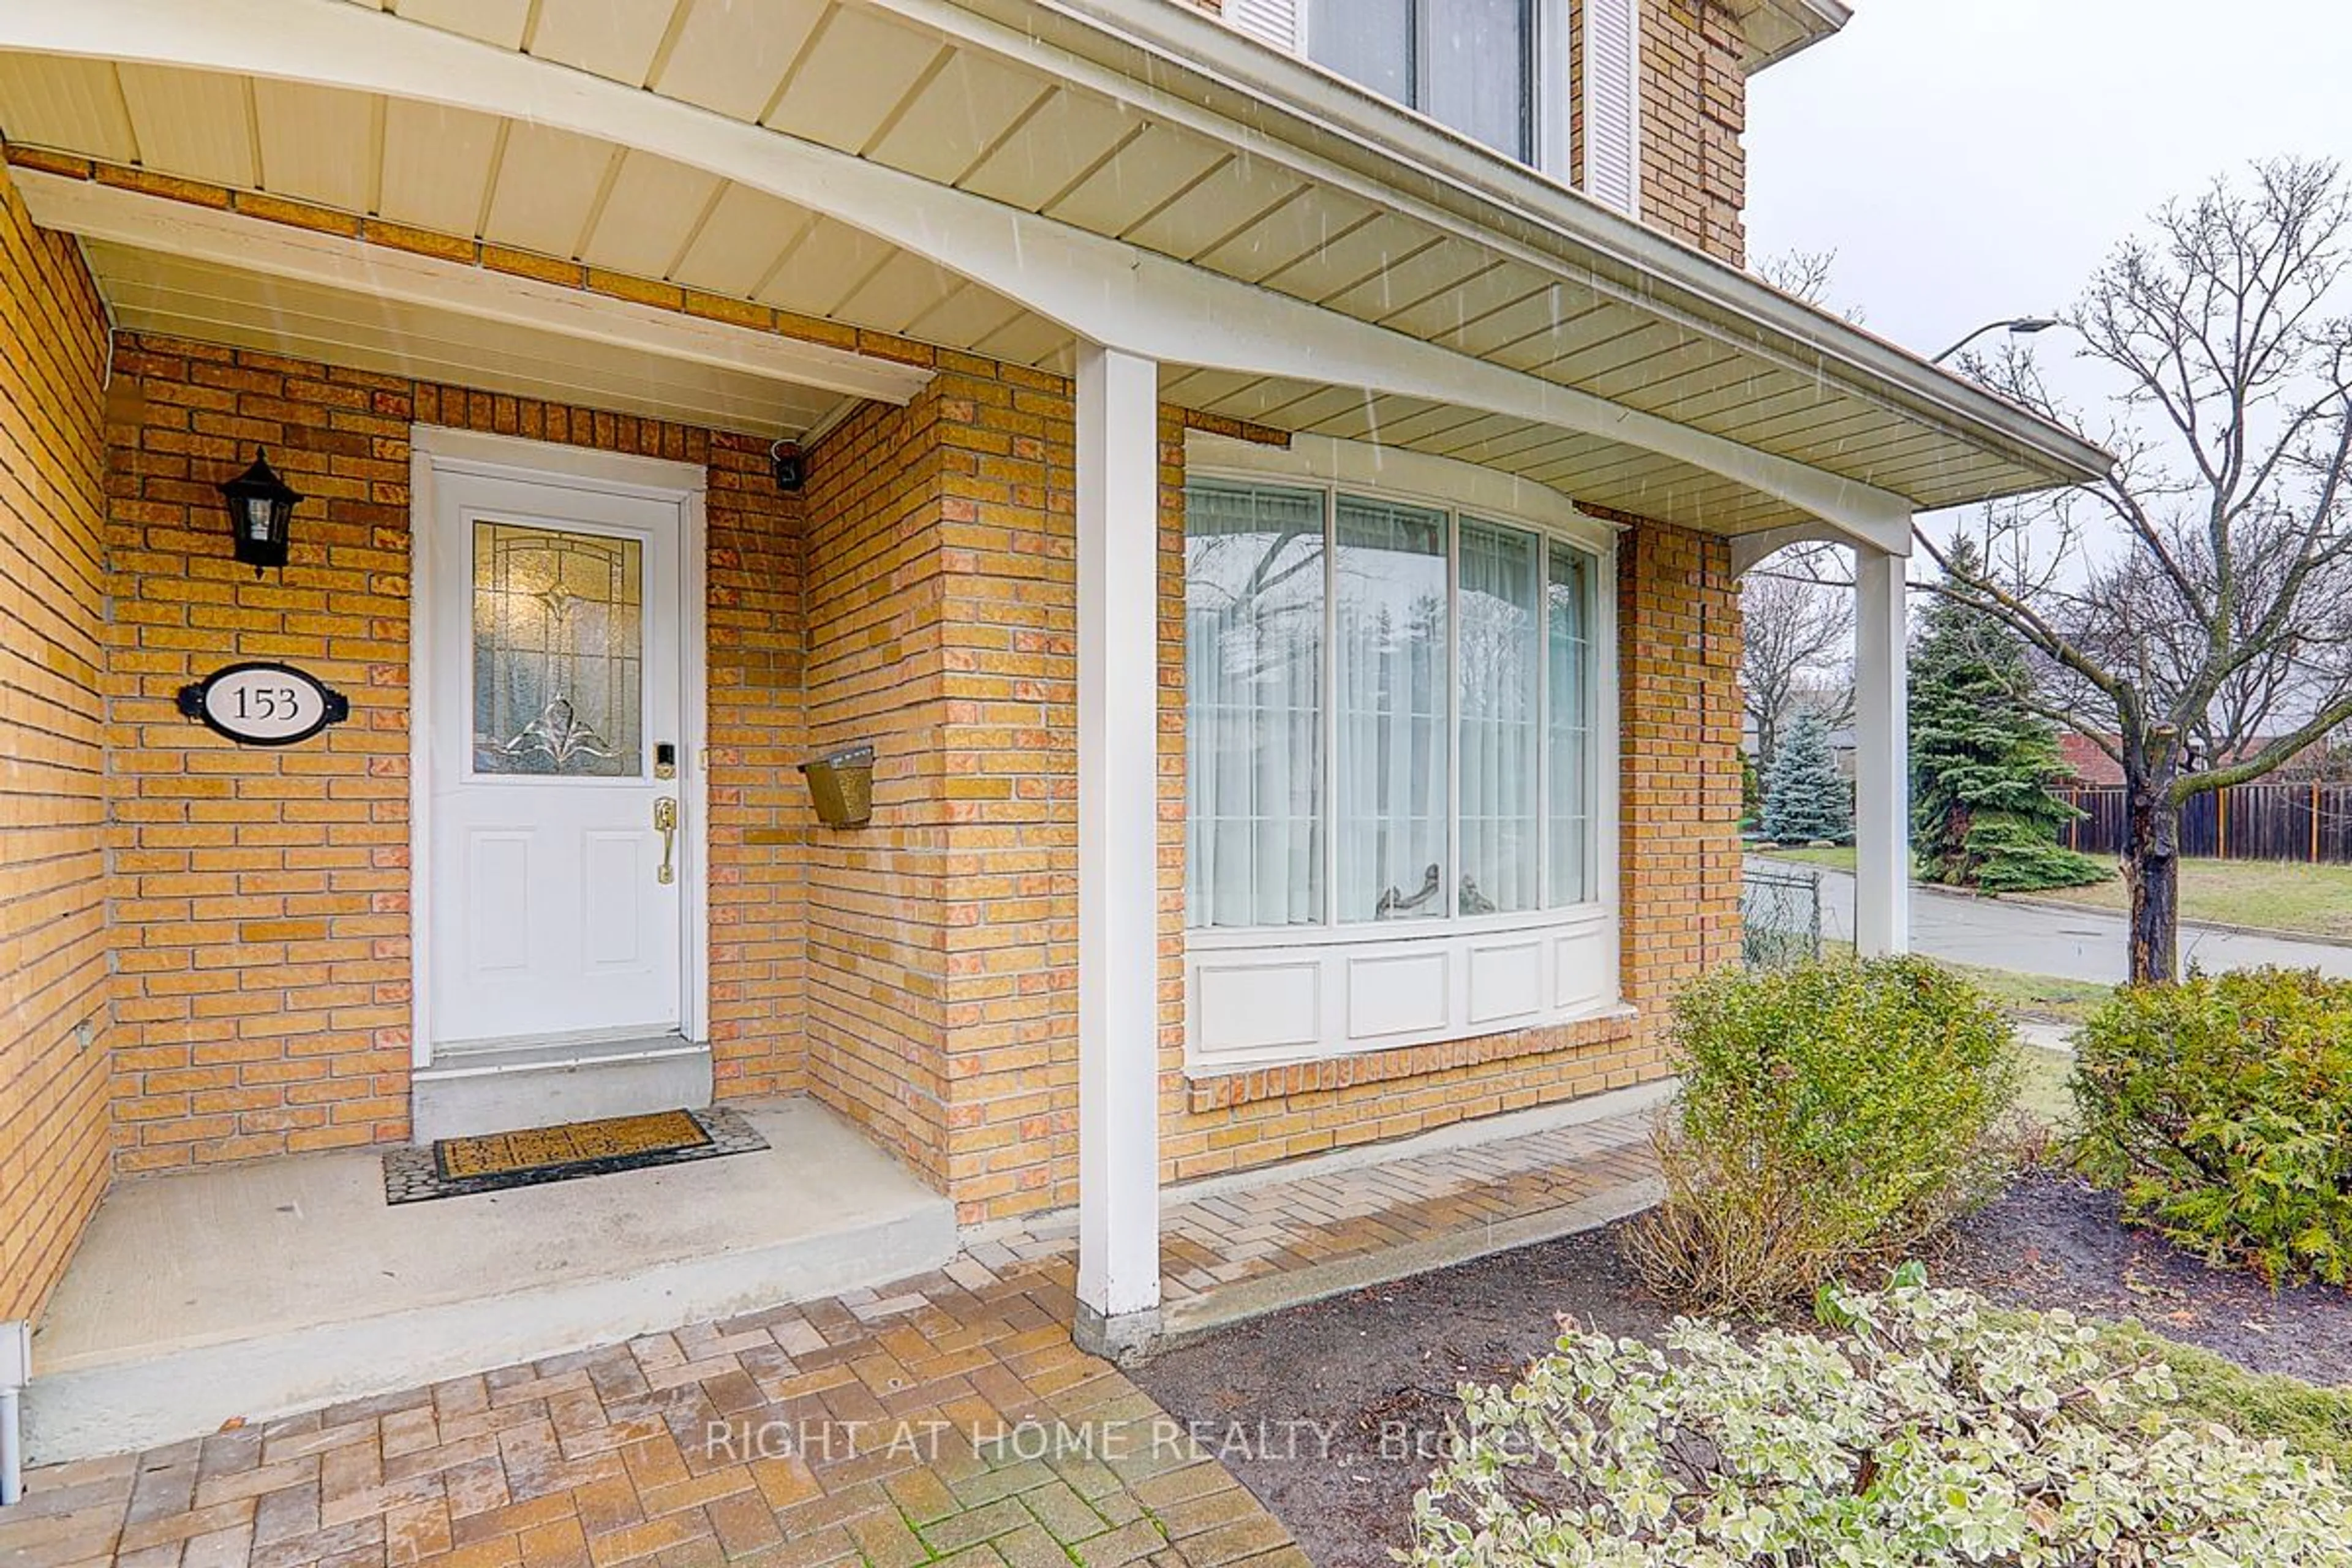 Home with brick exterior material for 153 Willowbrook Rd, Markham Ontario L3T 5P4